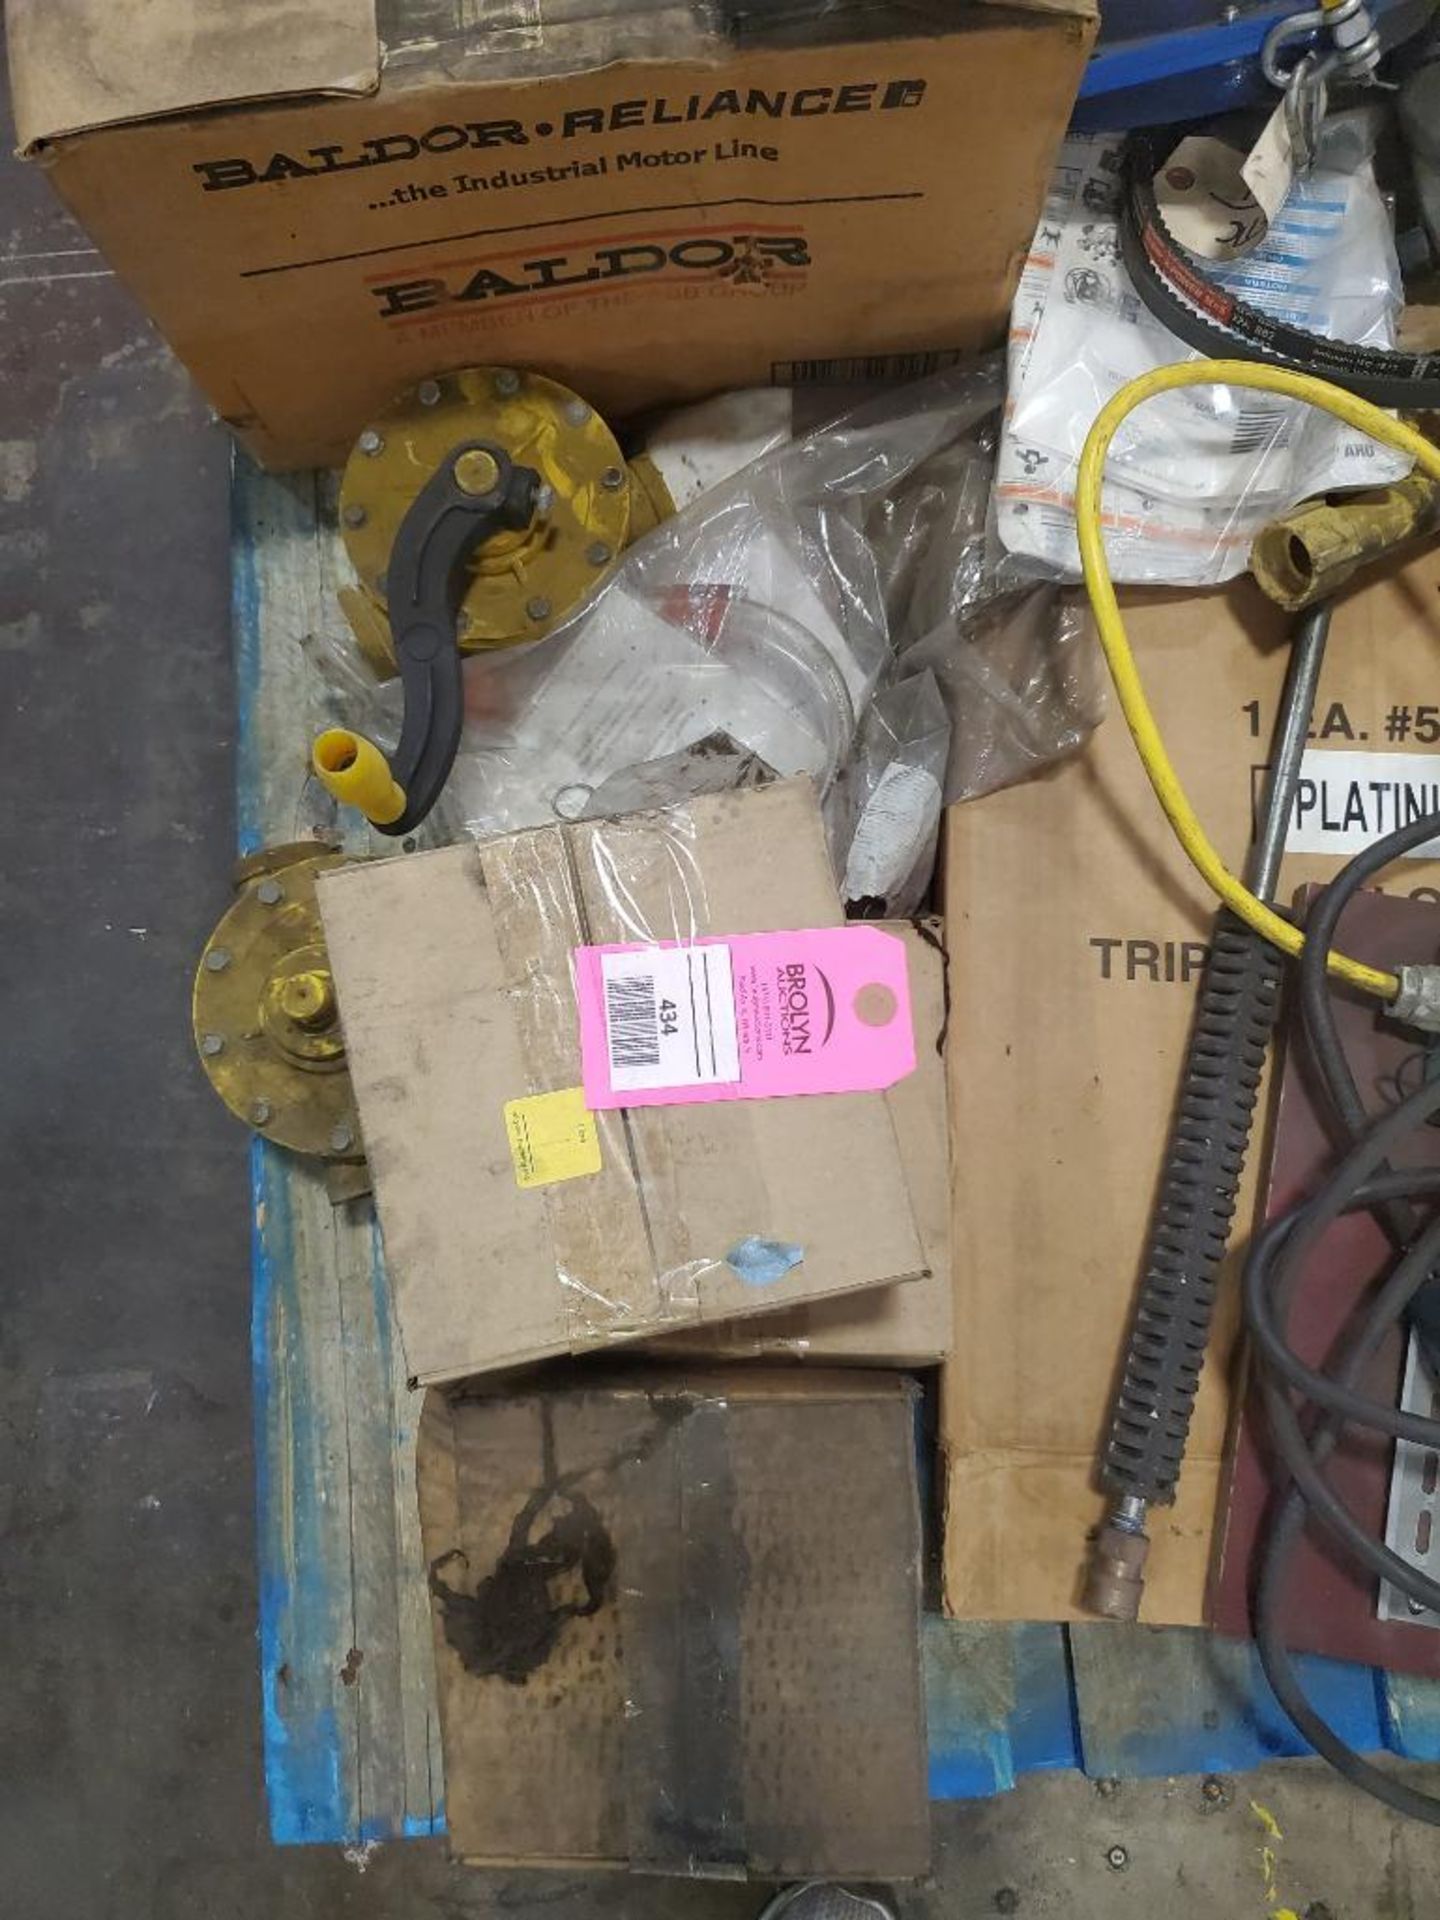 Pallet of assorted equipment. Tool balancers, scanners, air line equipment. - Image 2 of 6